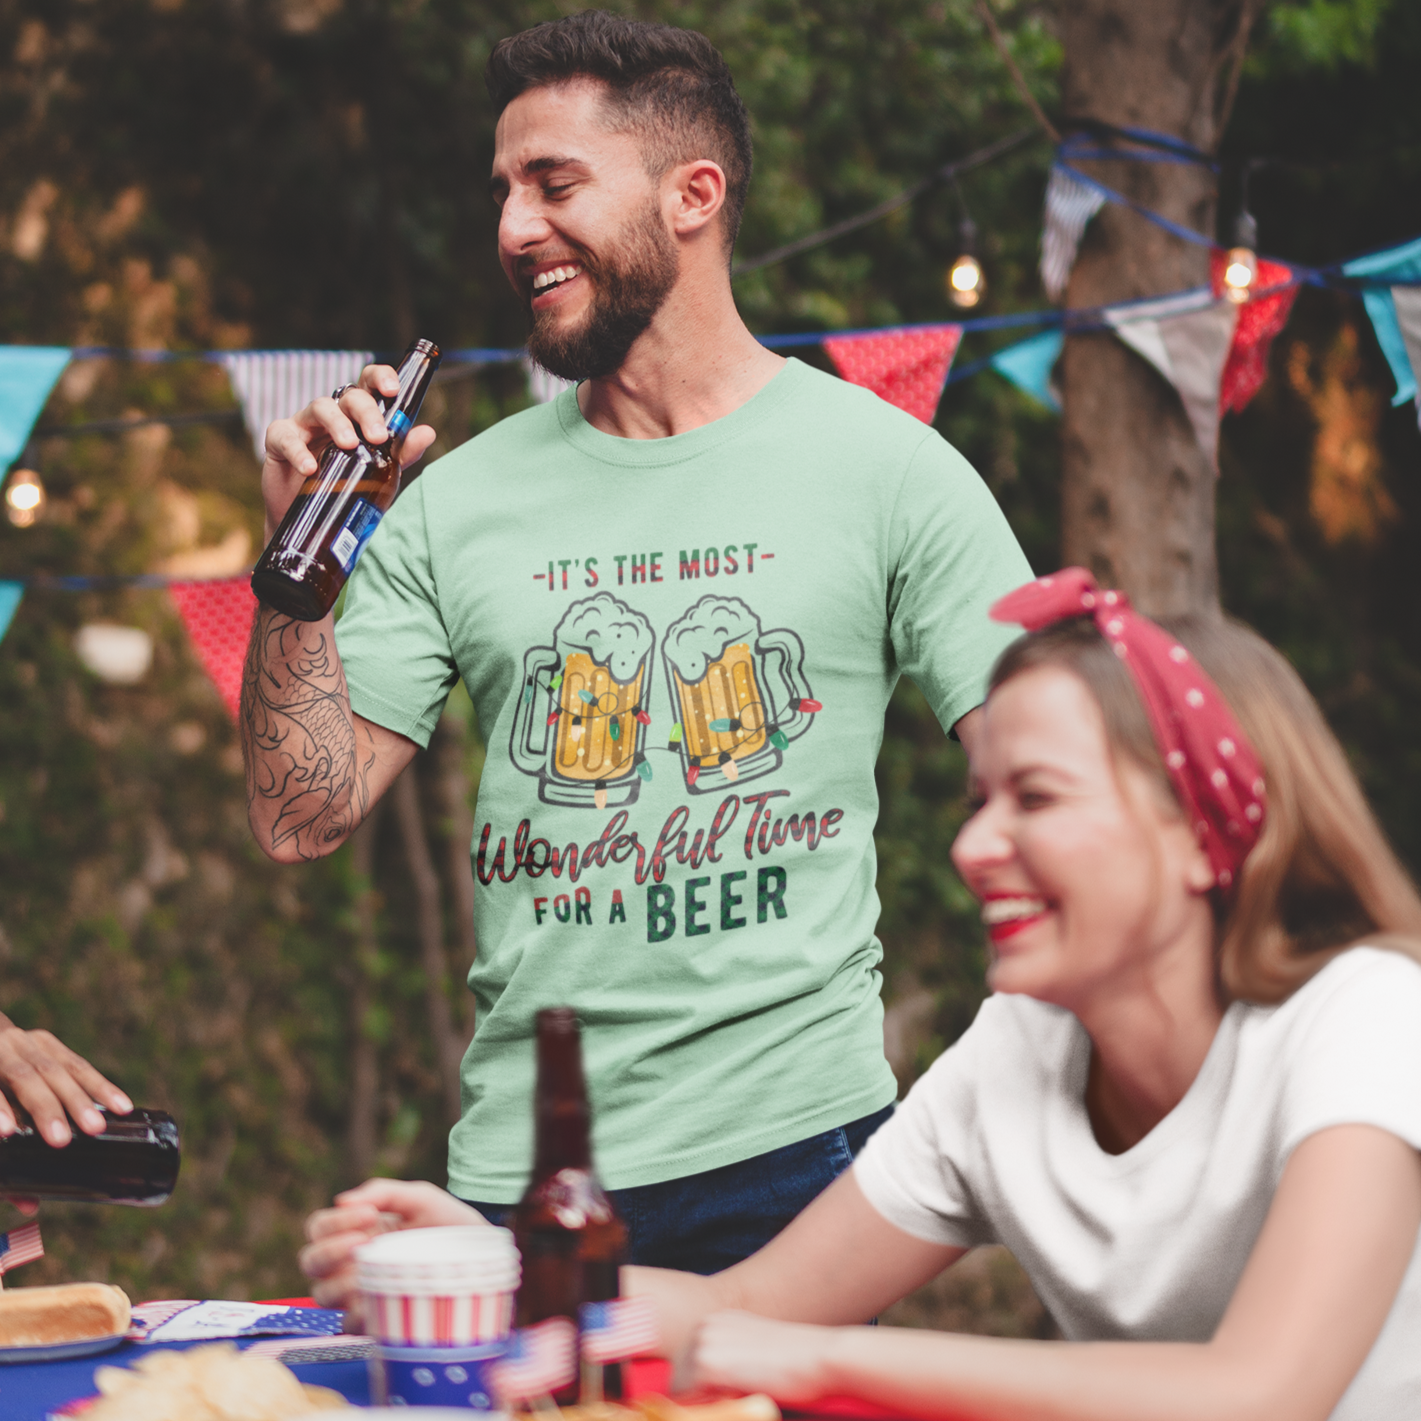 Wonderful time for a beer Unisex T-Shirt